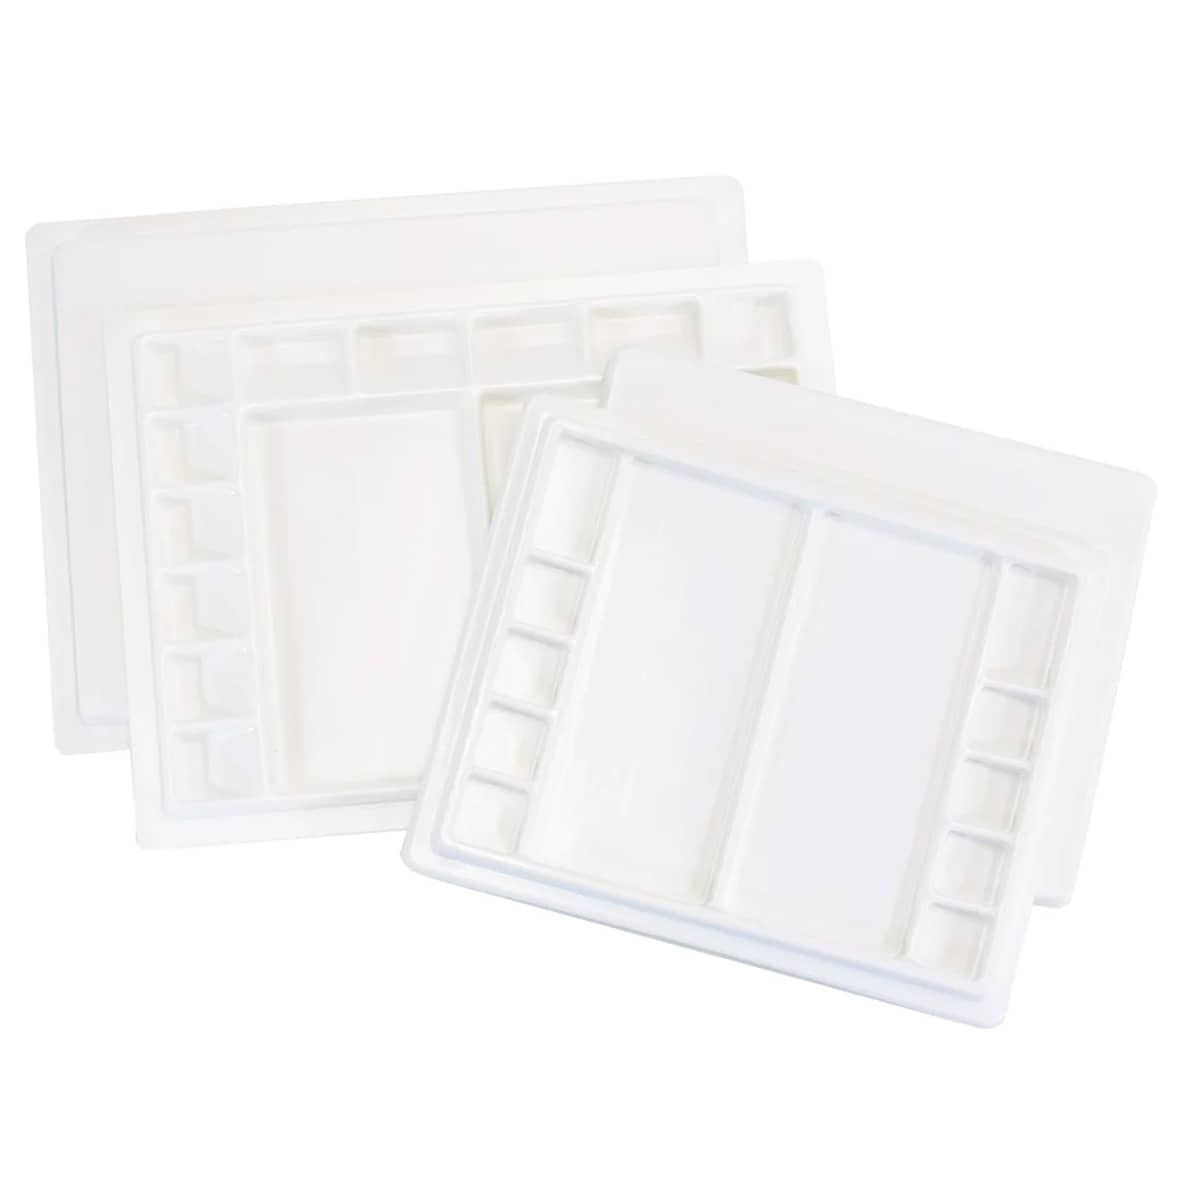 The watercolor palette is made of sturdy 2mm thick plastic